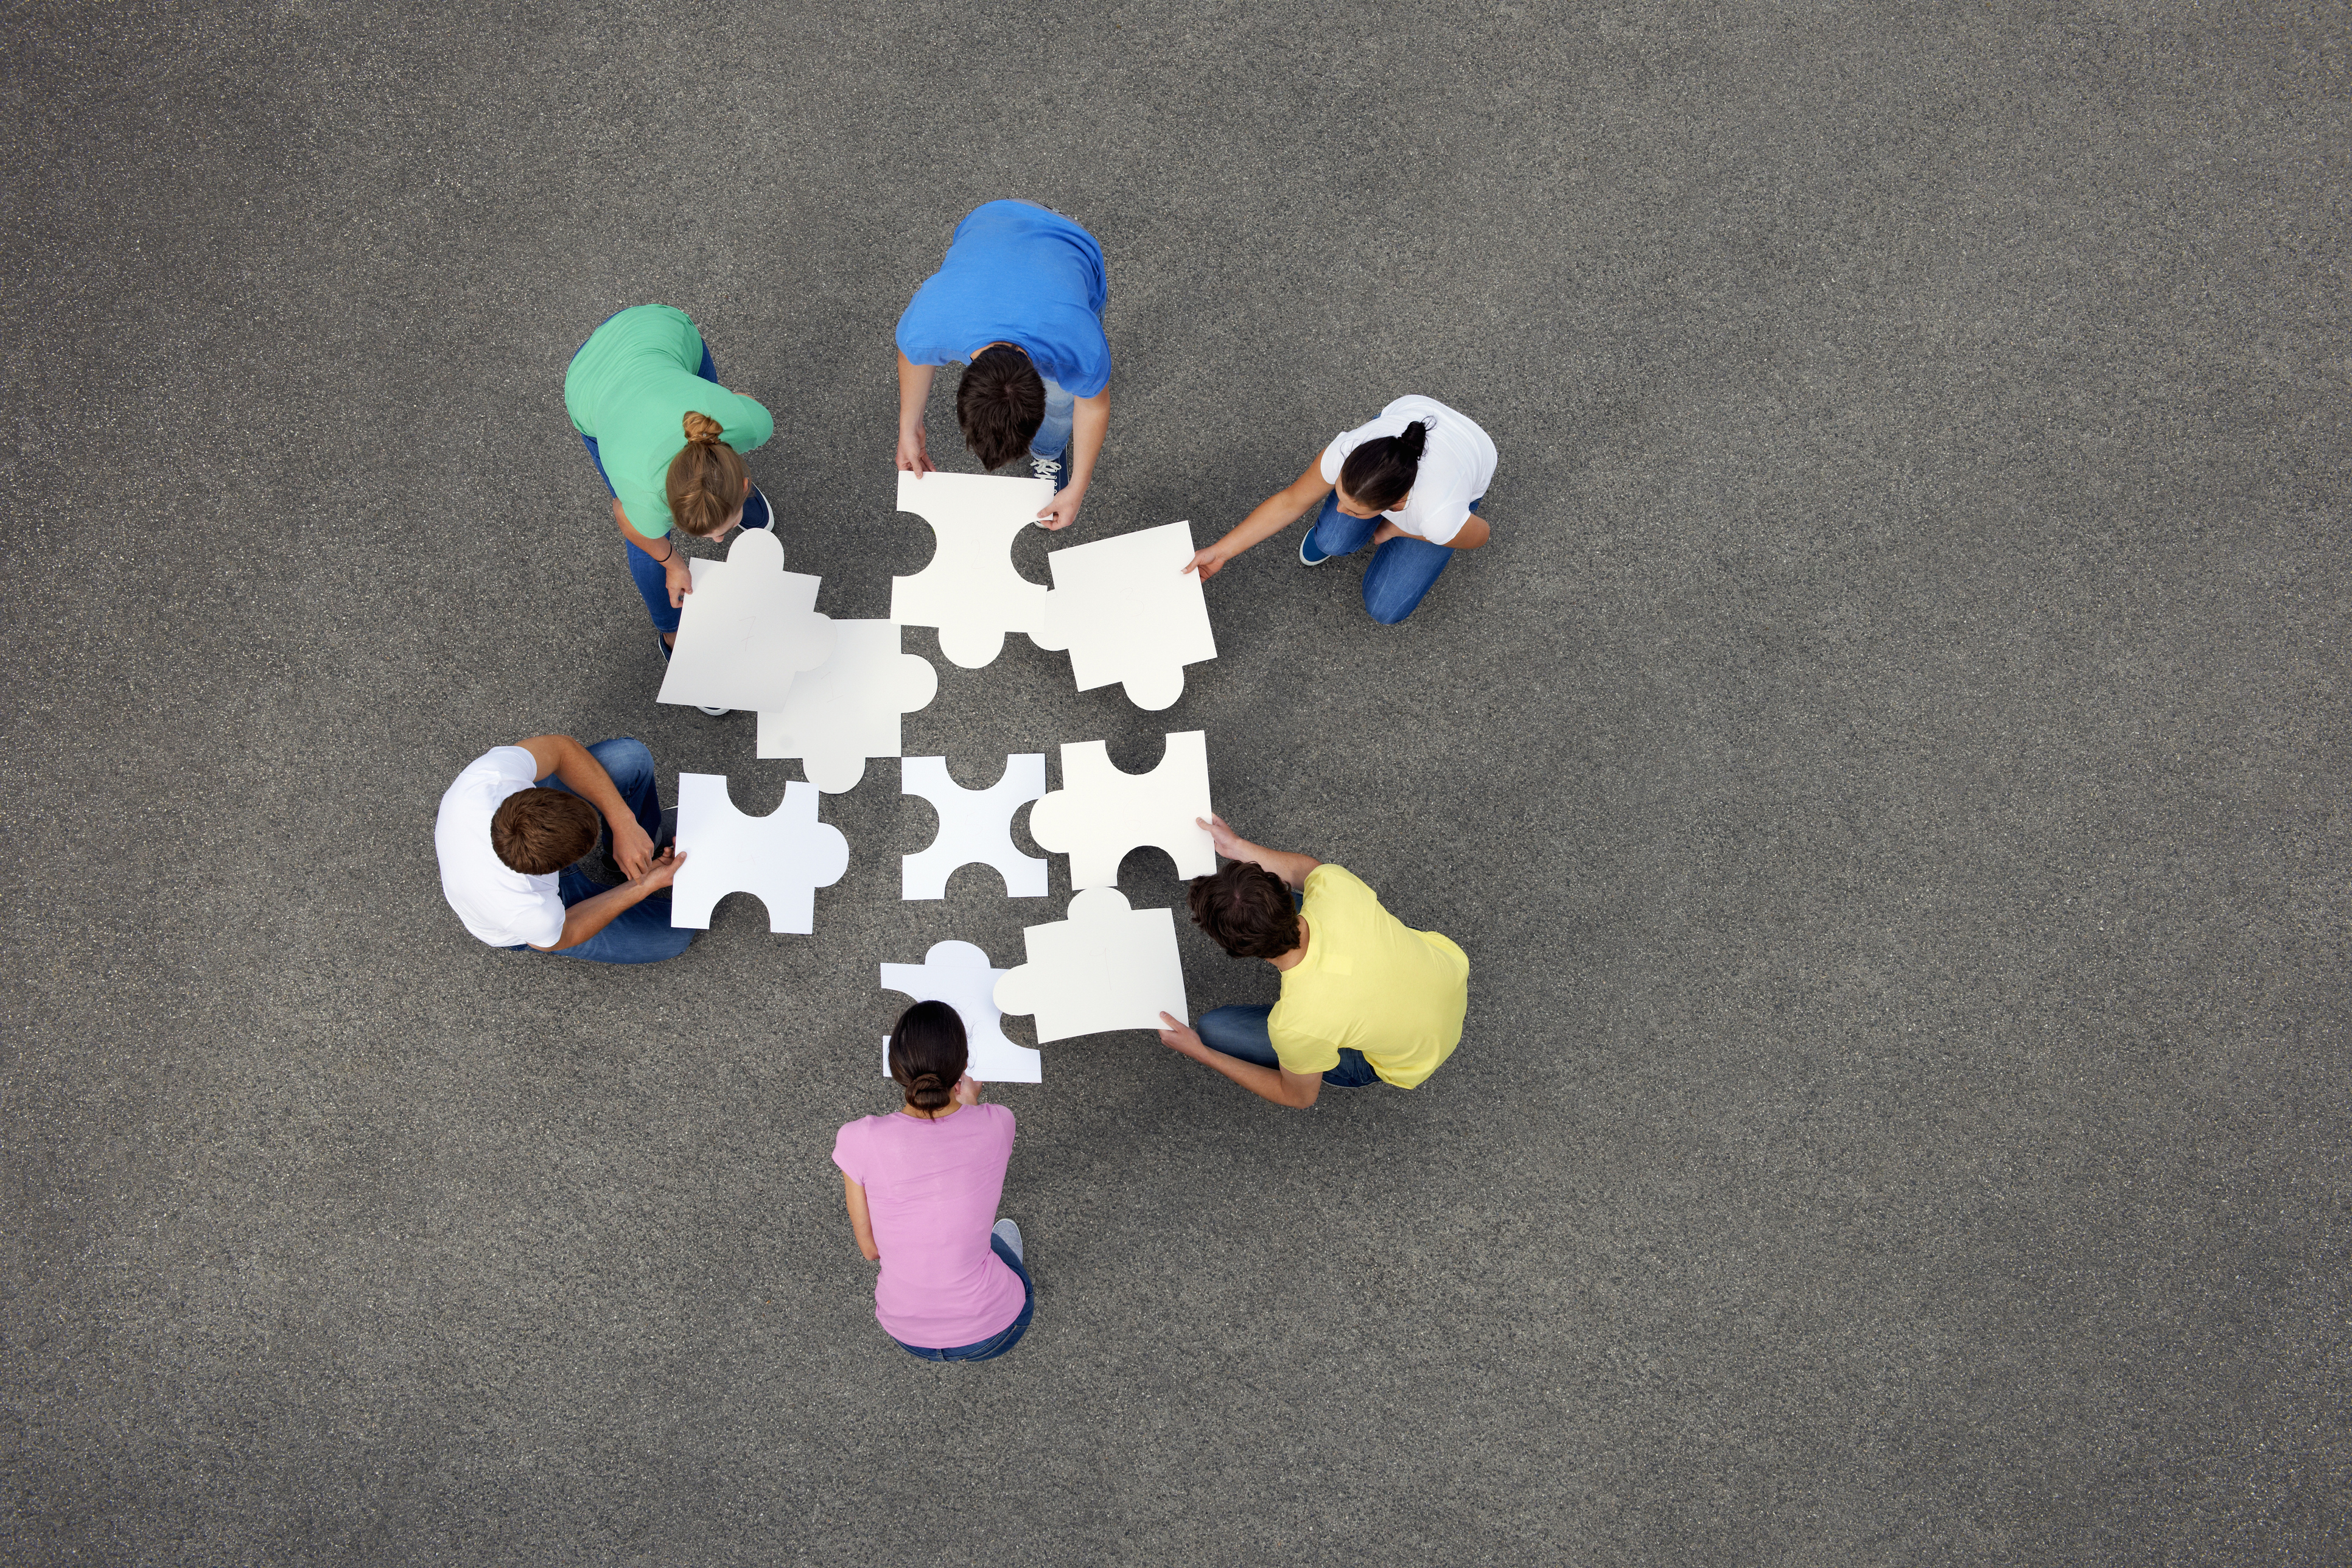 Aerial photograph of six people putting together a large jigsaw puzzle.